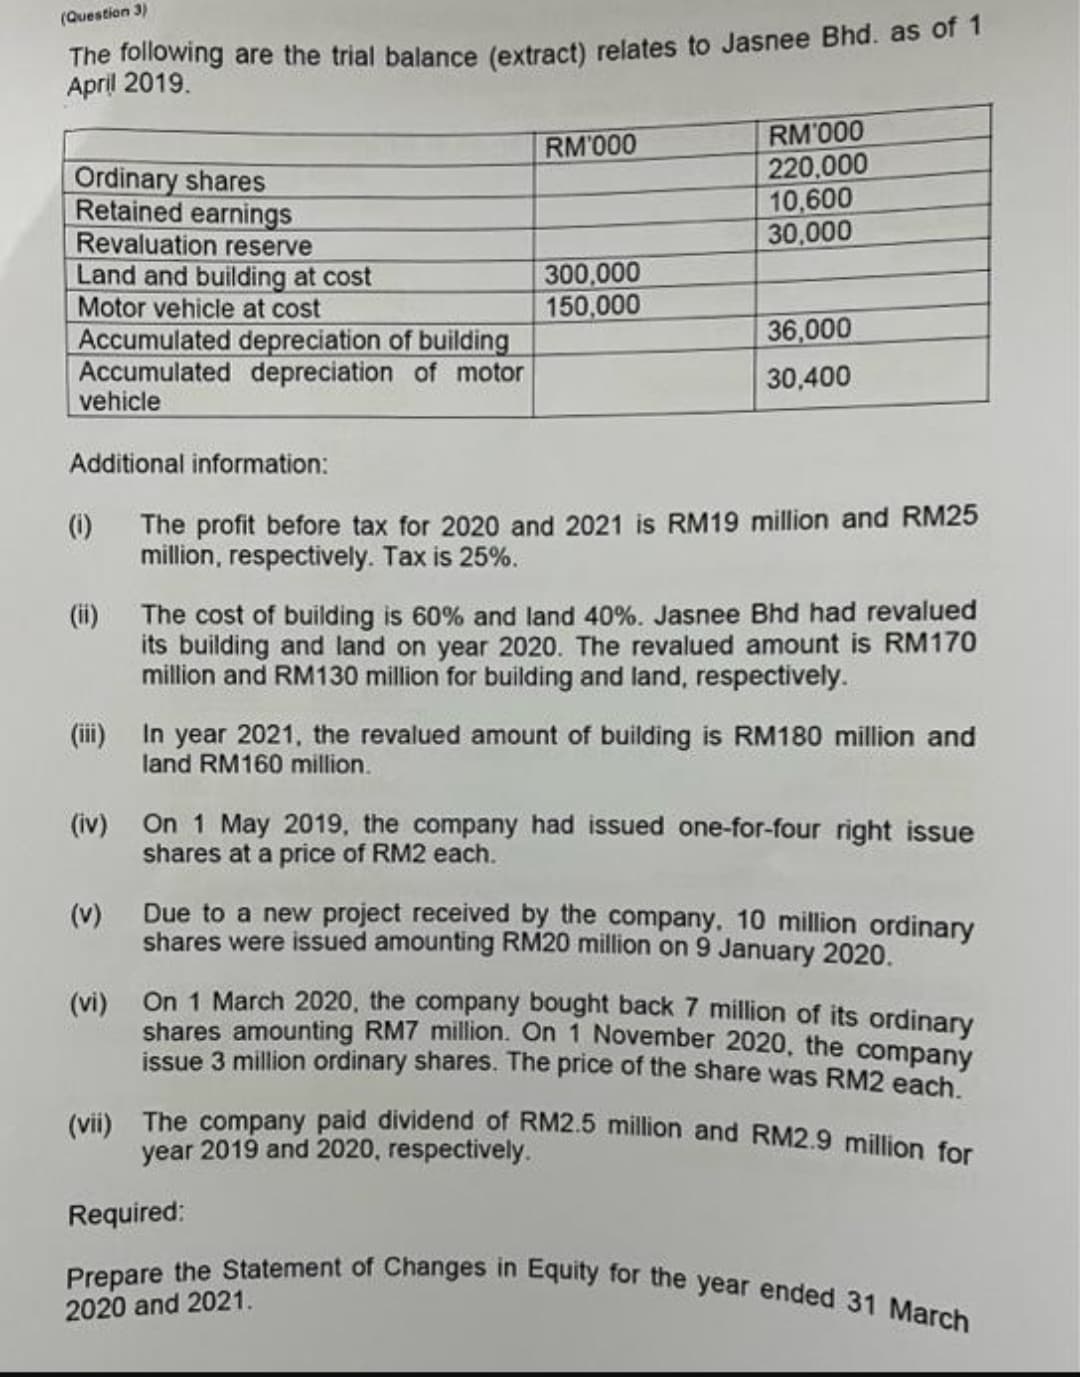 (Question 3)
The following are the trial balance (extract) relates to Jasnee Bhd. as of 1
April 2019.
Ordinary shares
Retained earnings
Revaluation reserve
Land and building at cost
Motor vehicle at cost
Accumulated depreciation of building
Accumulated depreciation of motor
vehicle
Additional information:
(1)
RM'000
300,000
150,000
RM'000
220,000
10,600
30,000
36,000
30,400
The profit before tax for 2020 and 2021 is RM19 million and RM25
million, respectively. Tax is 25%.
(ii) The cost of building is 60% and land 40%. Jasnee Bhd had revalued
its building and land on year 2020. The revalued amount is RM170
million and RM130 million for building and land, respectively.
(iii) In year 2021, the revalued amount of building is RM180 million and
land RM160 million.
Required:
(iv)
On 1 May 2019, the company had issued one-for-four right issue
shares at a price of RM2 each.
(v)
Due to a new project received by the company. 10 million ordinary
shares were issued amounting RM20 million on 9 January 2020.
(vi)
On 1 March 2020, the company bought back 7 million of its ordinary
shares amounting RM7 million. On 1 November 2020, the company
issue 3 million ordinary shares. The price of the share was RM2 each.
(vii) The company paid dividend of RM2.5 million and RM2.9 million for
year 2019 and 2020, respectively.
Prepare the Statement of Changes in Equity for the year ended 31 March
2020 and 2021.